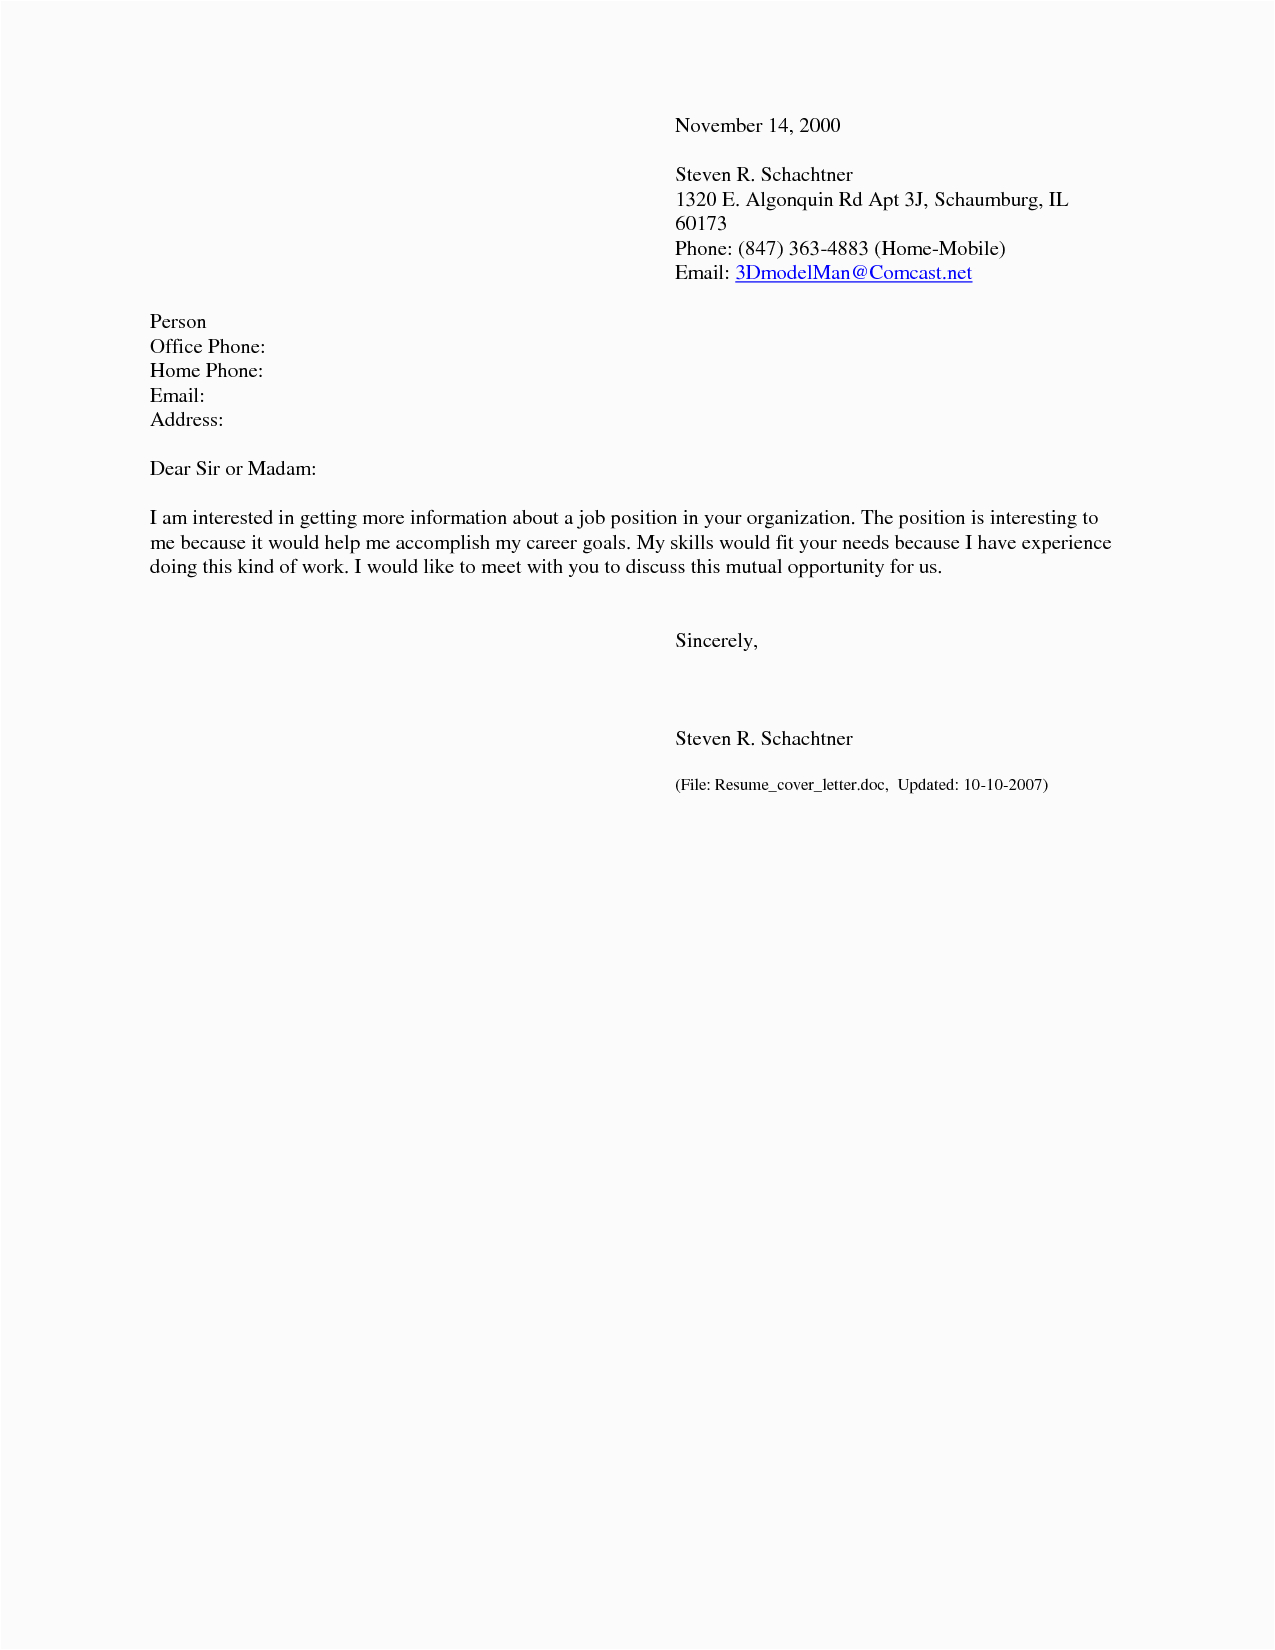 Email to Send Cover Letter and Resume Sample Cover Letter for Emailing Resume Database